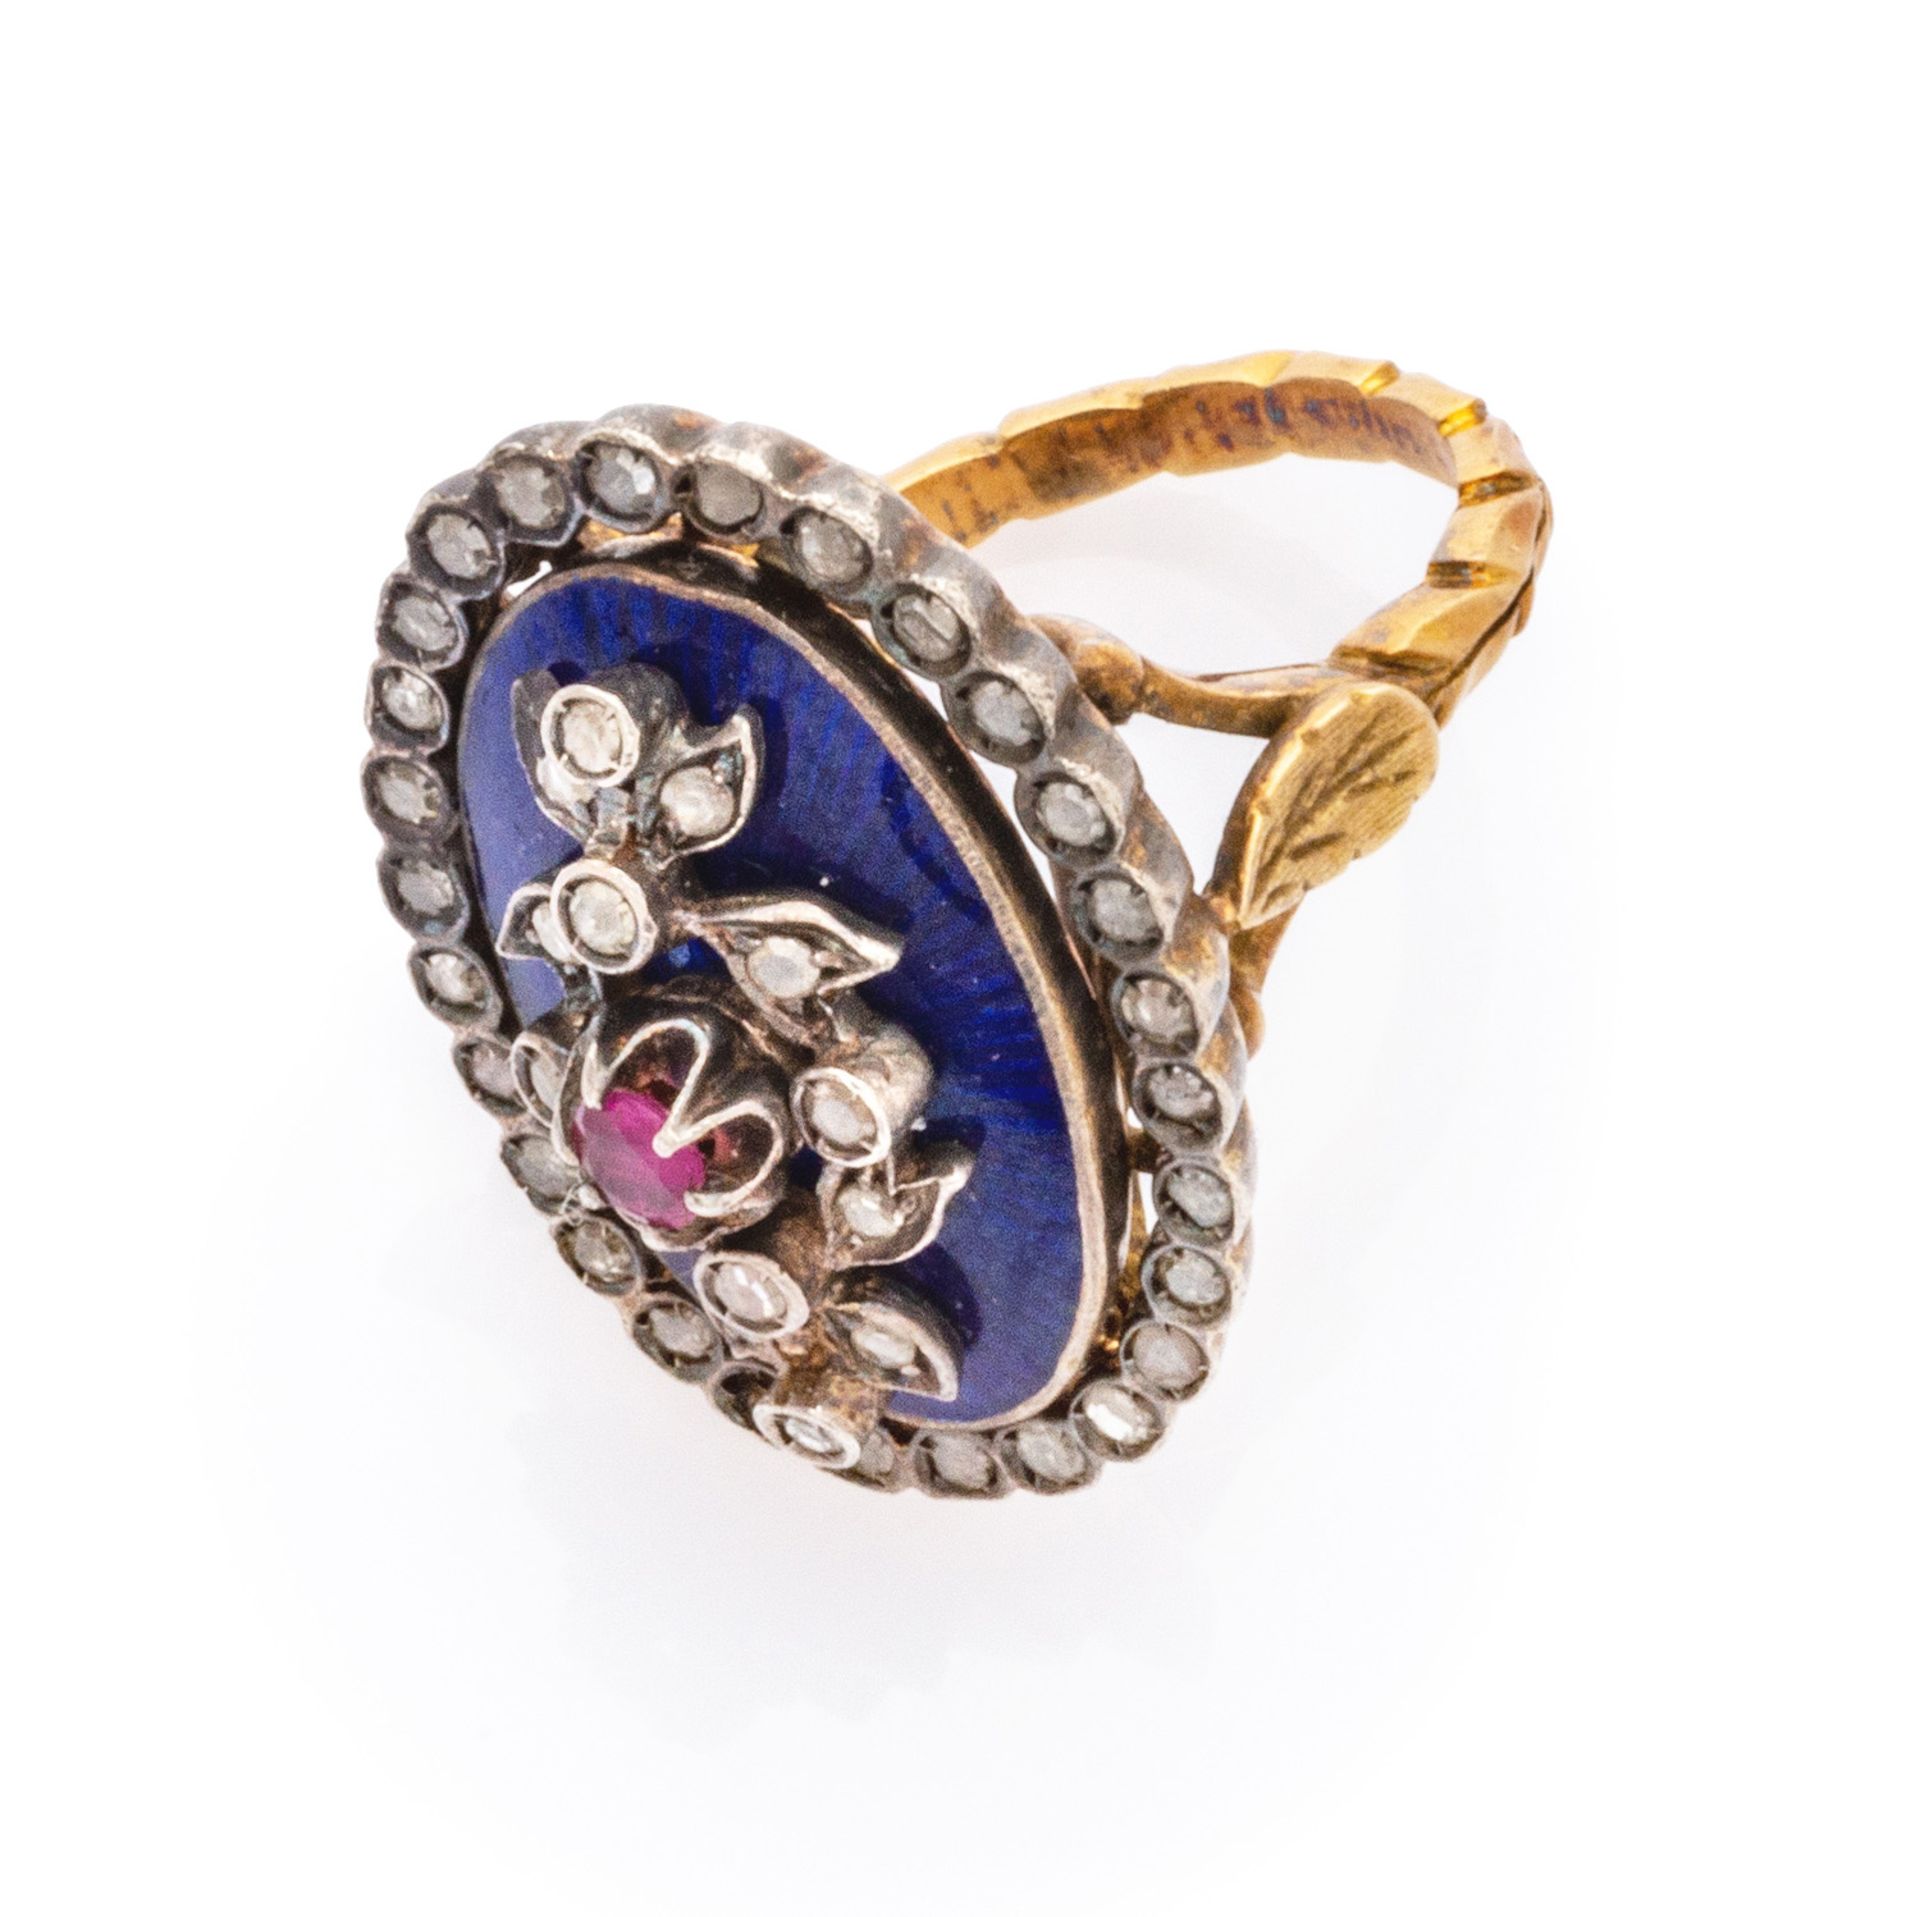 RING with mount in yellow gold 18 kts. and blue enameled silver, with raceme composition with rose